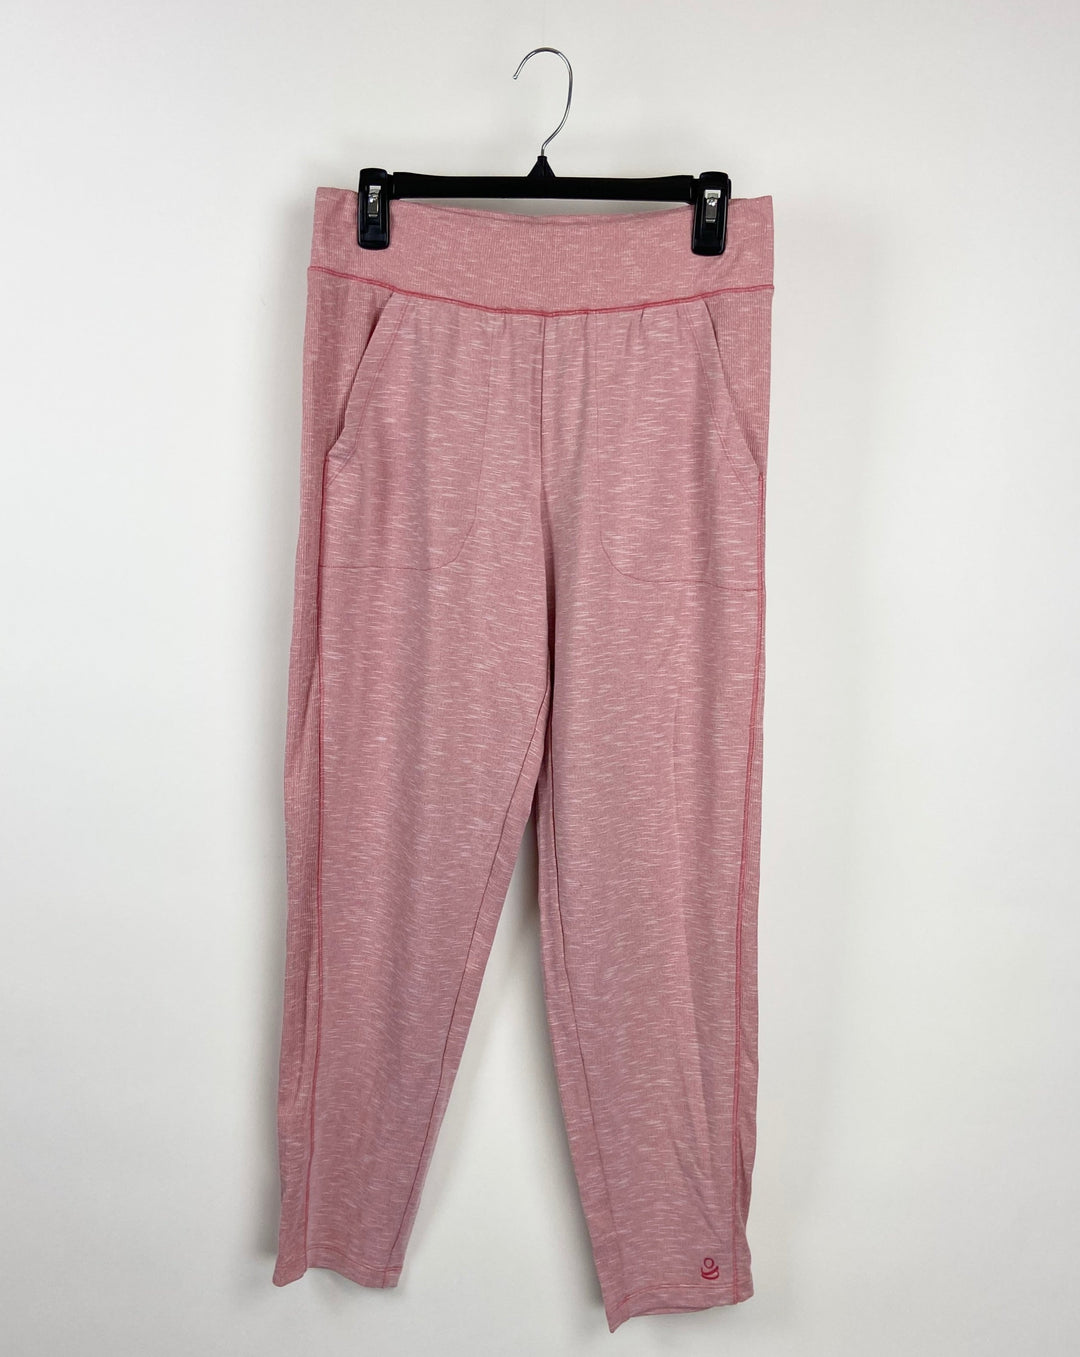 Pink Fitted Sweatpants - Size 6/8